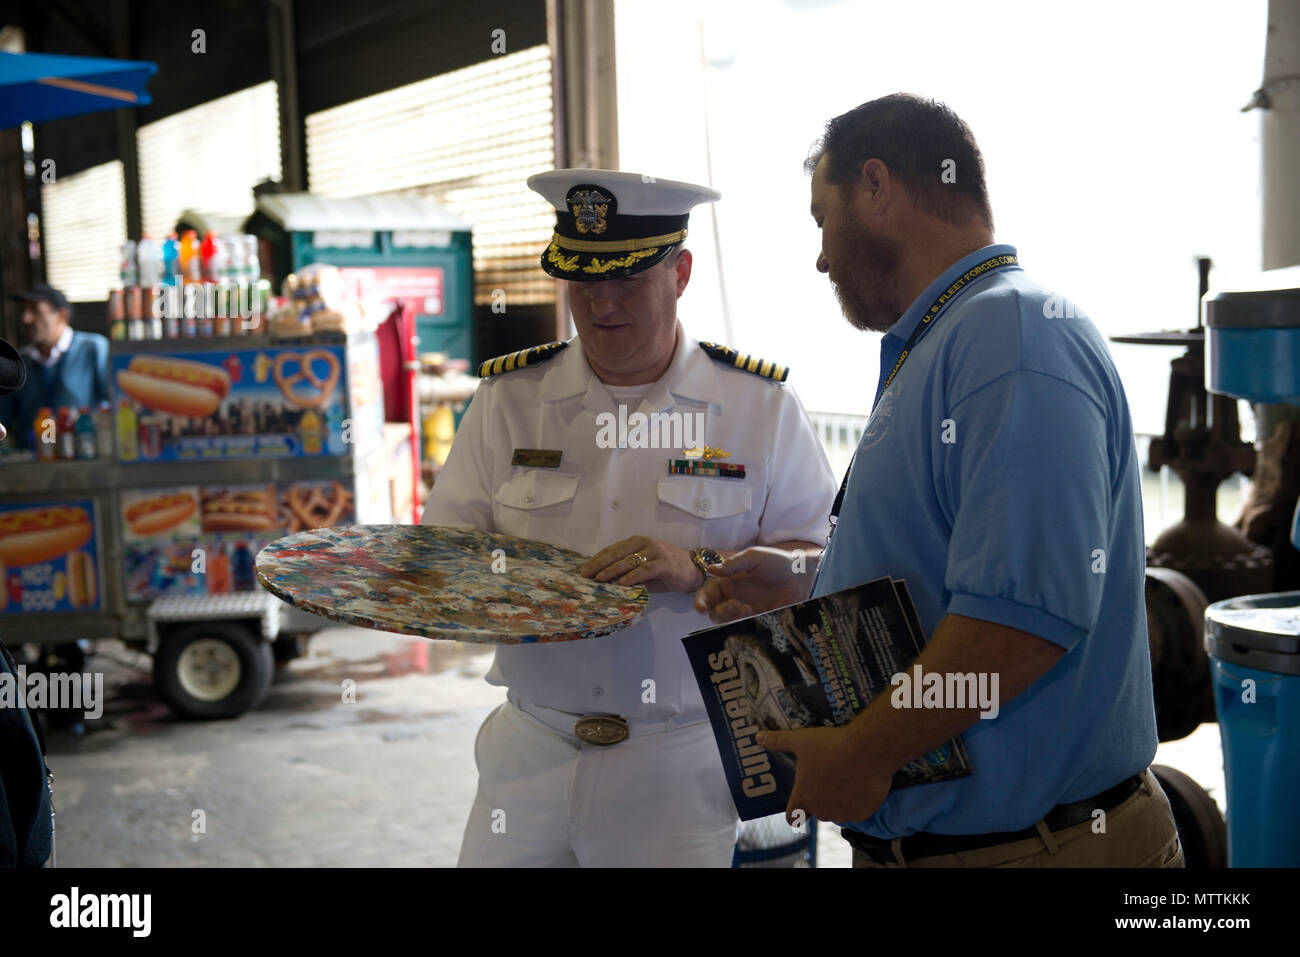 180527-N-IT235-0052 NEW YORK (May 27, 2018) Michael Jones, the environmental resources and planning section head for U.S. Fleet Forces Command’s Fleet Environmental and Readiness Division, explains the shipboard waste process to reduce plastic waste aboard ships at the U.S. Navy’s “Stewards of the Sea: Defending Freedom, Protecting the Environment” exhibit during Fleet Week New York. The Navy employs every means available to mitigate the potential environmental effects of our activities without jeopardizing the safety of our Sailors or impacting our Navy readiness mission. (U.S. Navy photo by  Stock Photo